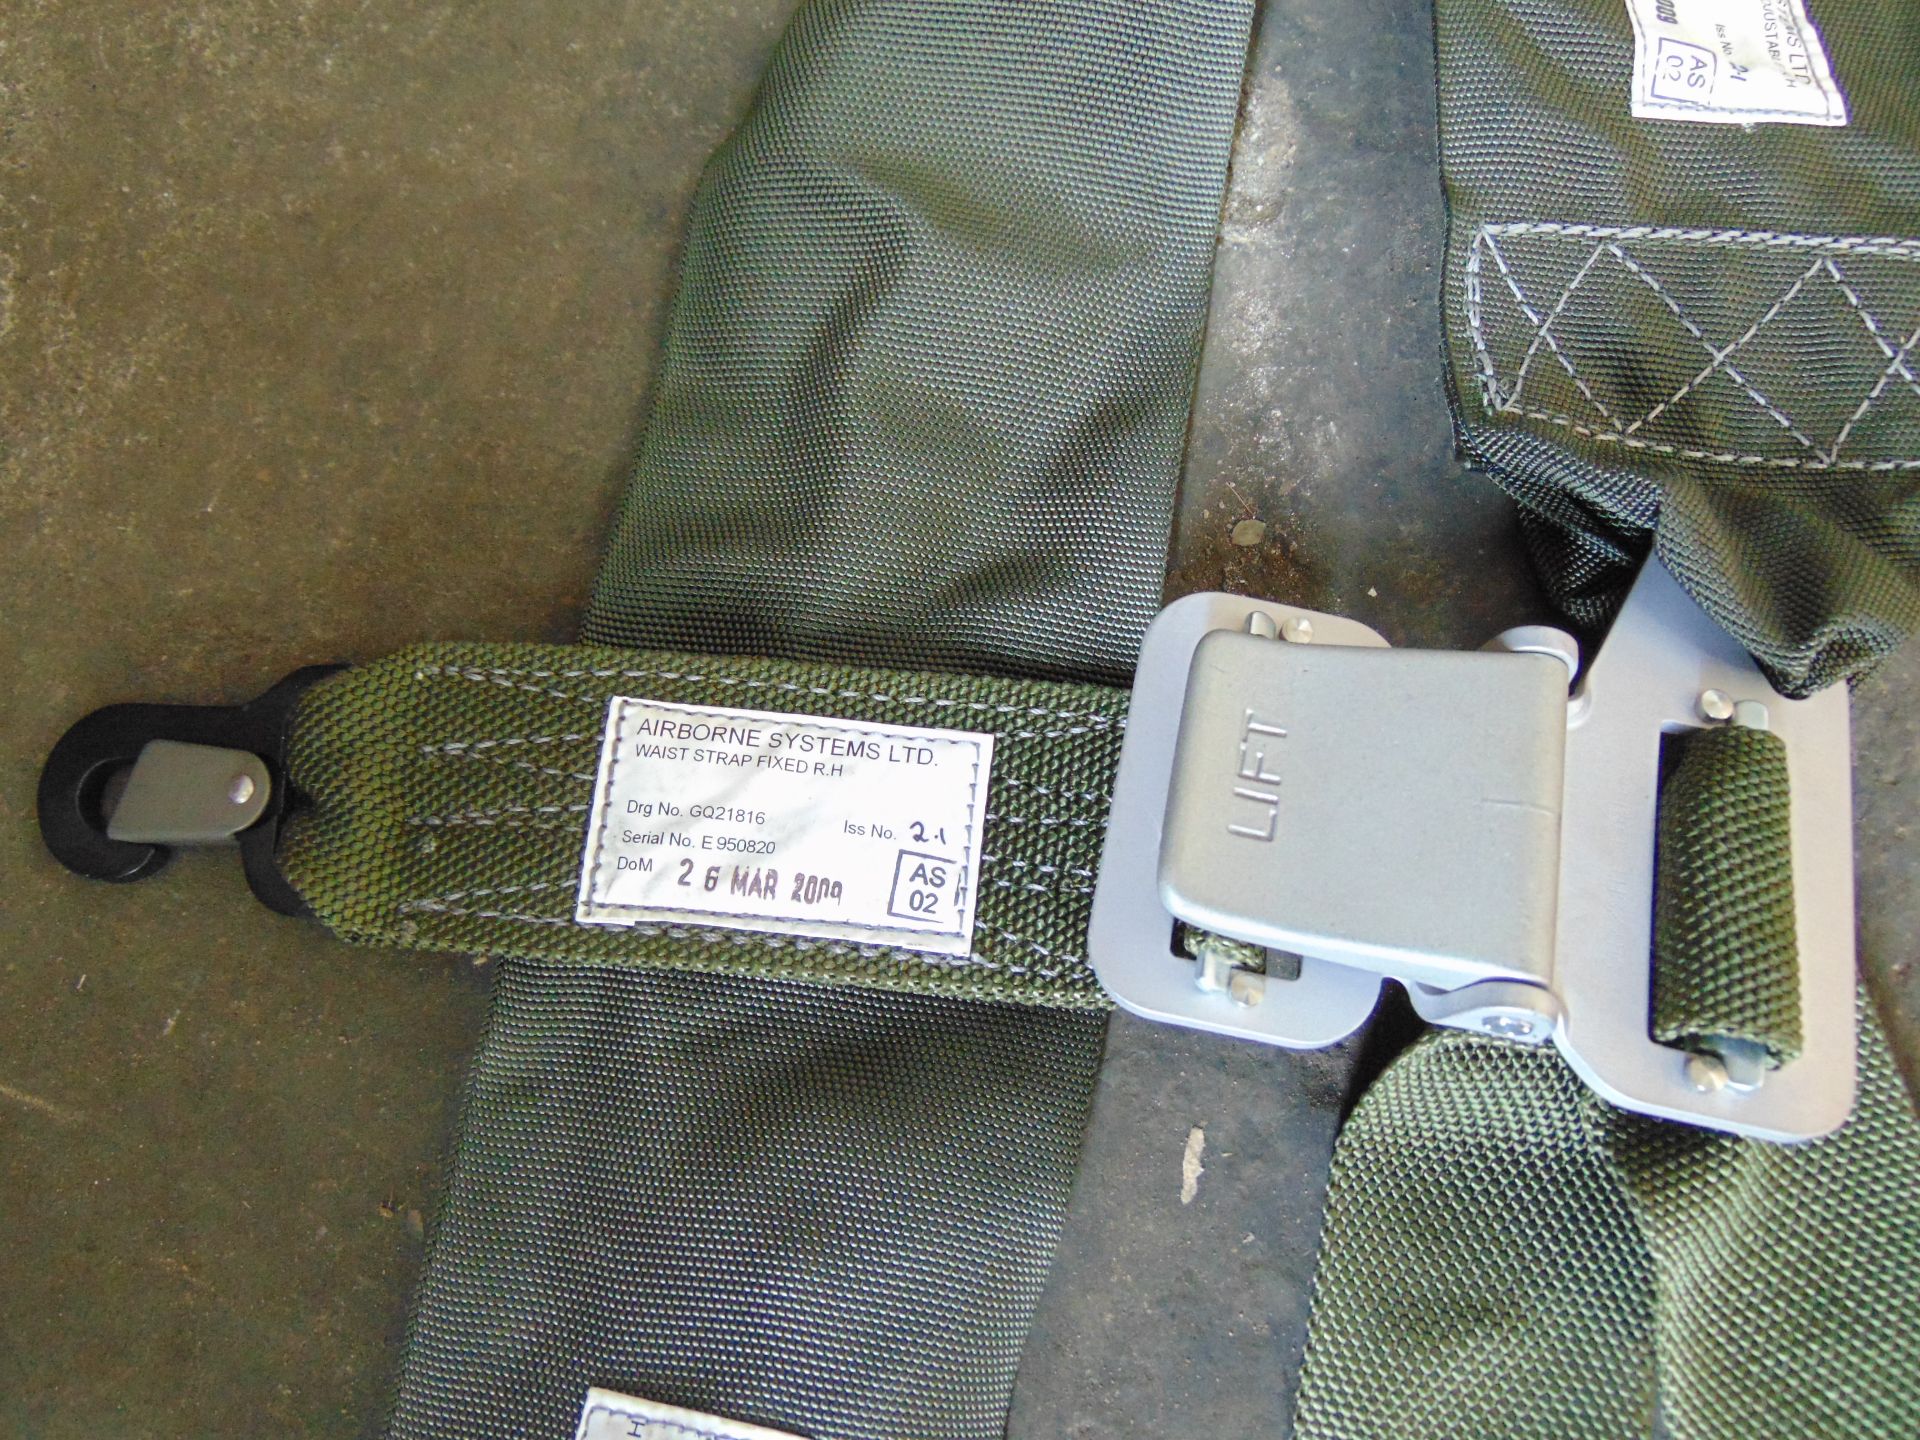 10 x Airborne Systems Ltd Casualty Saftey Harnesses - Image 3 of 7